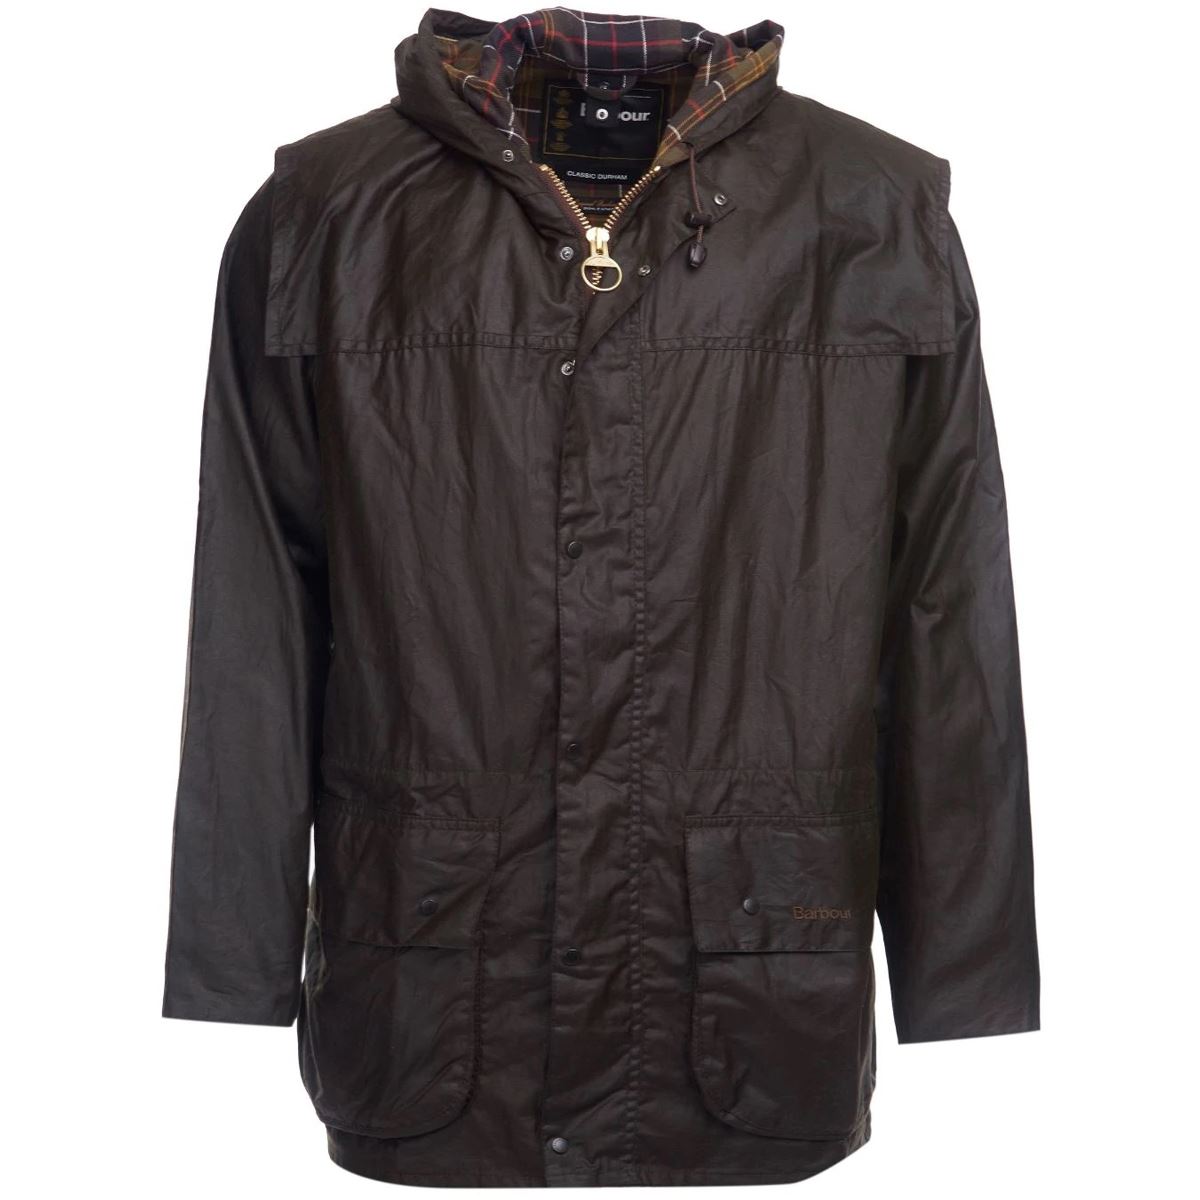 Is the Barbour Durham Jacket both lightweight and durable?